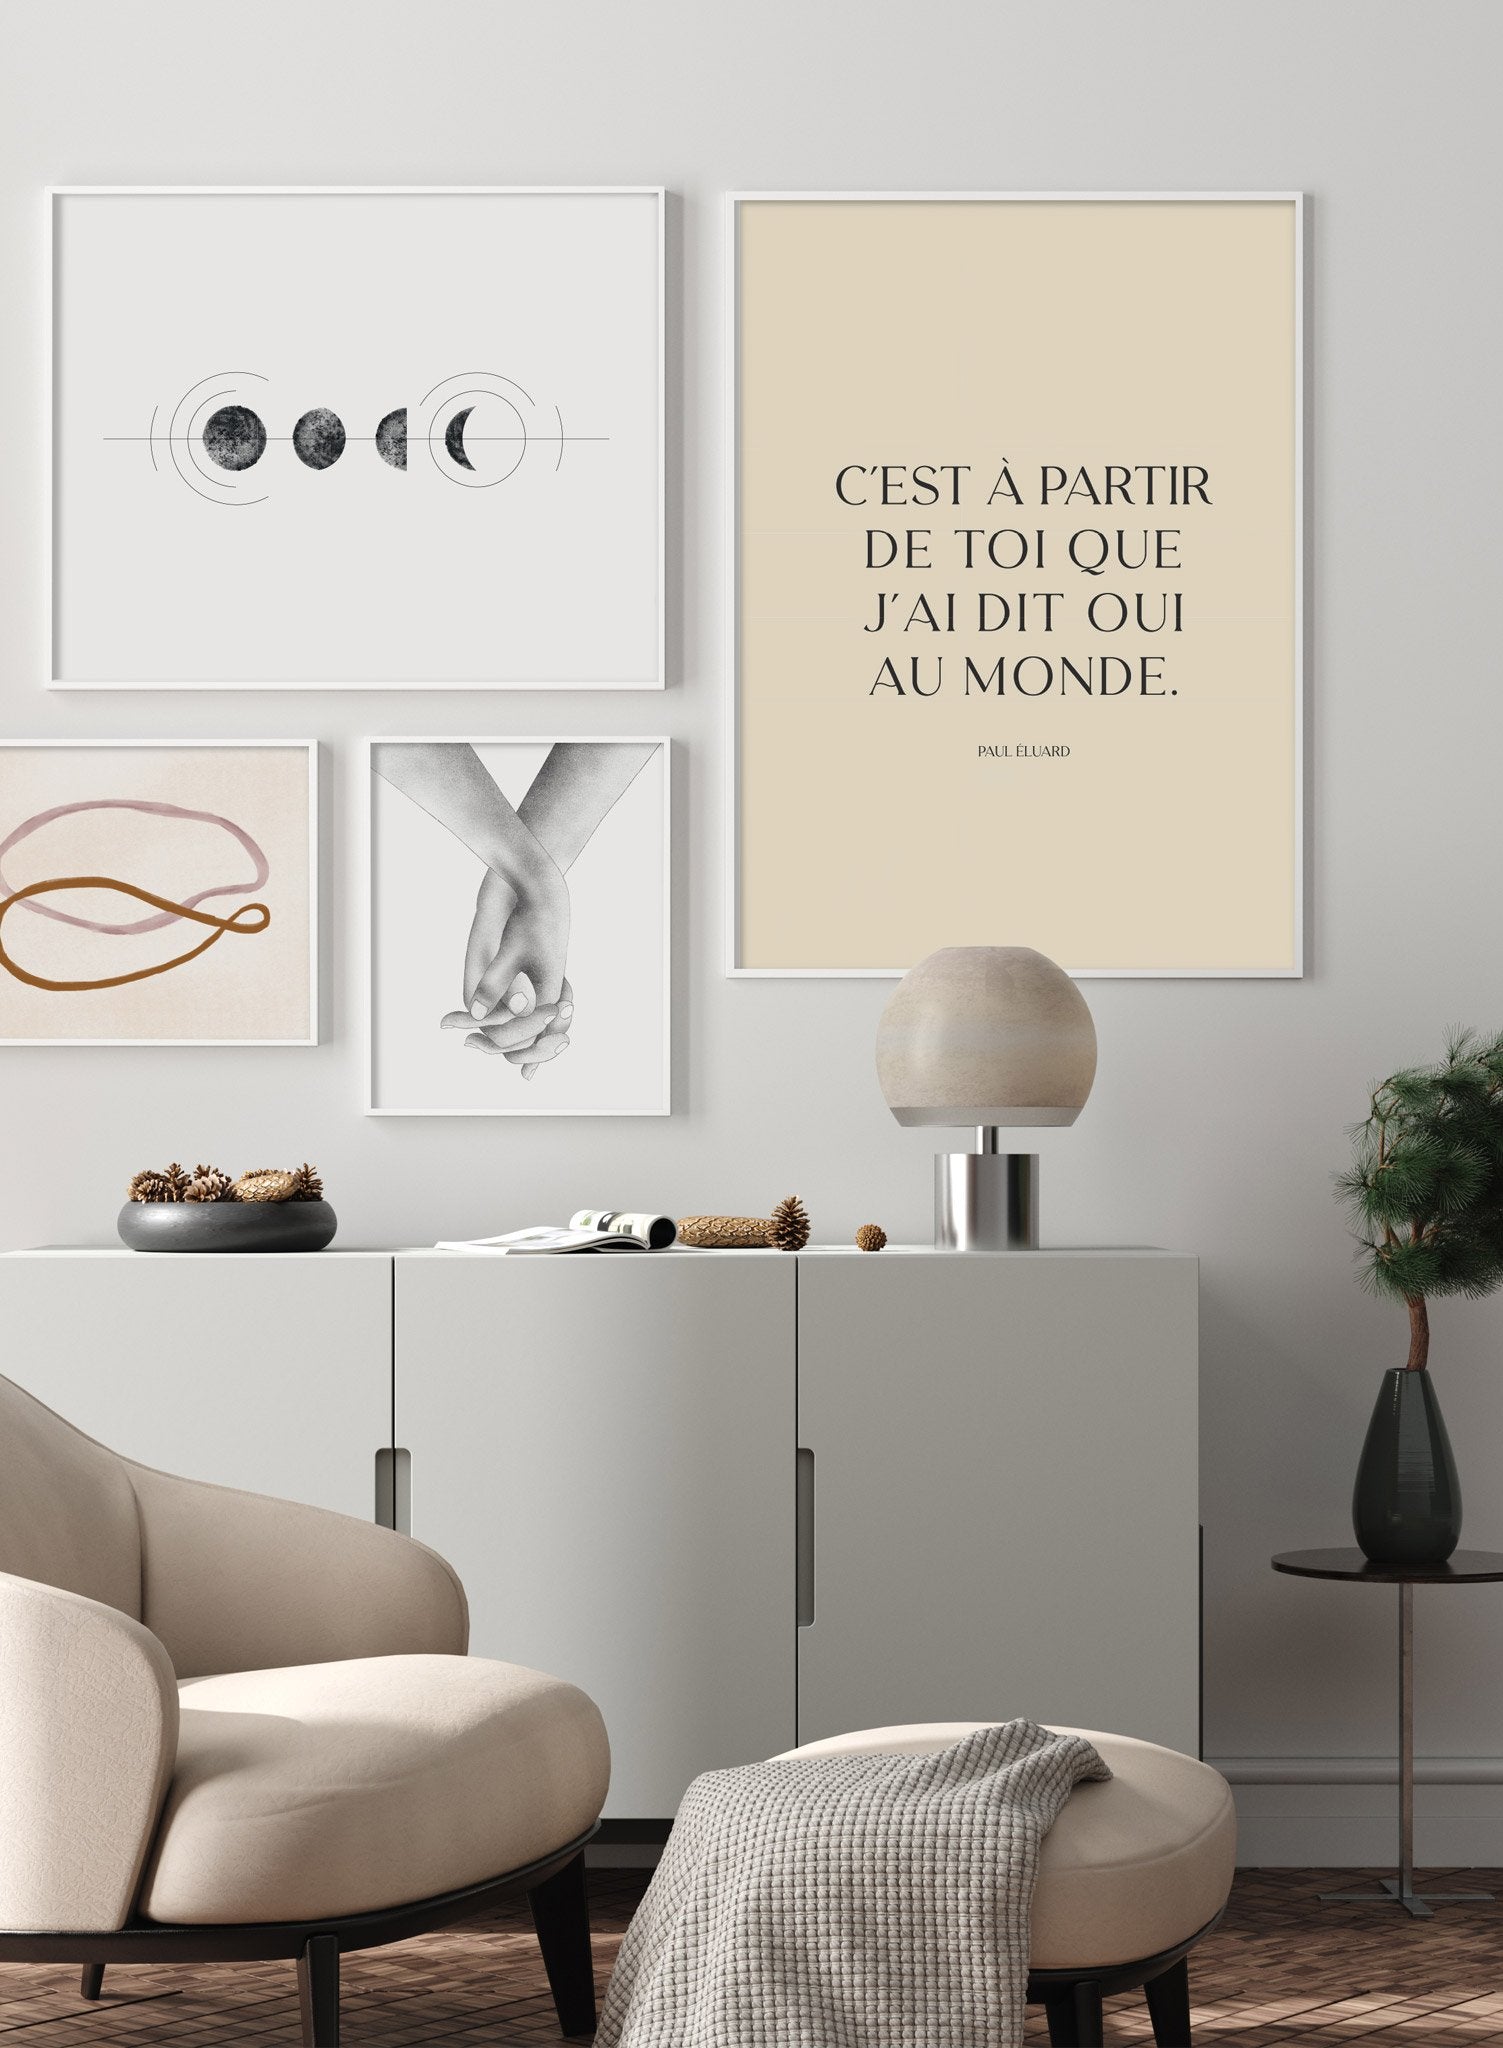 "Saying Yes to the World" is a minimalist typography poster by Opposite Wall of a romantic quote by French poet Paul Éluard in vintage lettering over a light beige background.